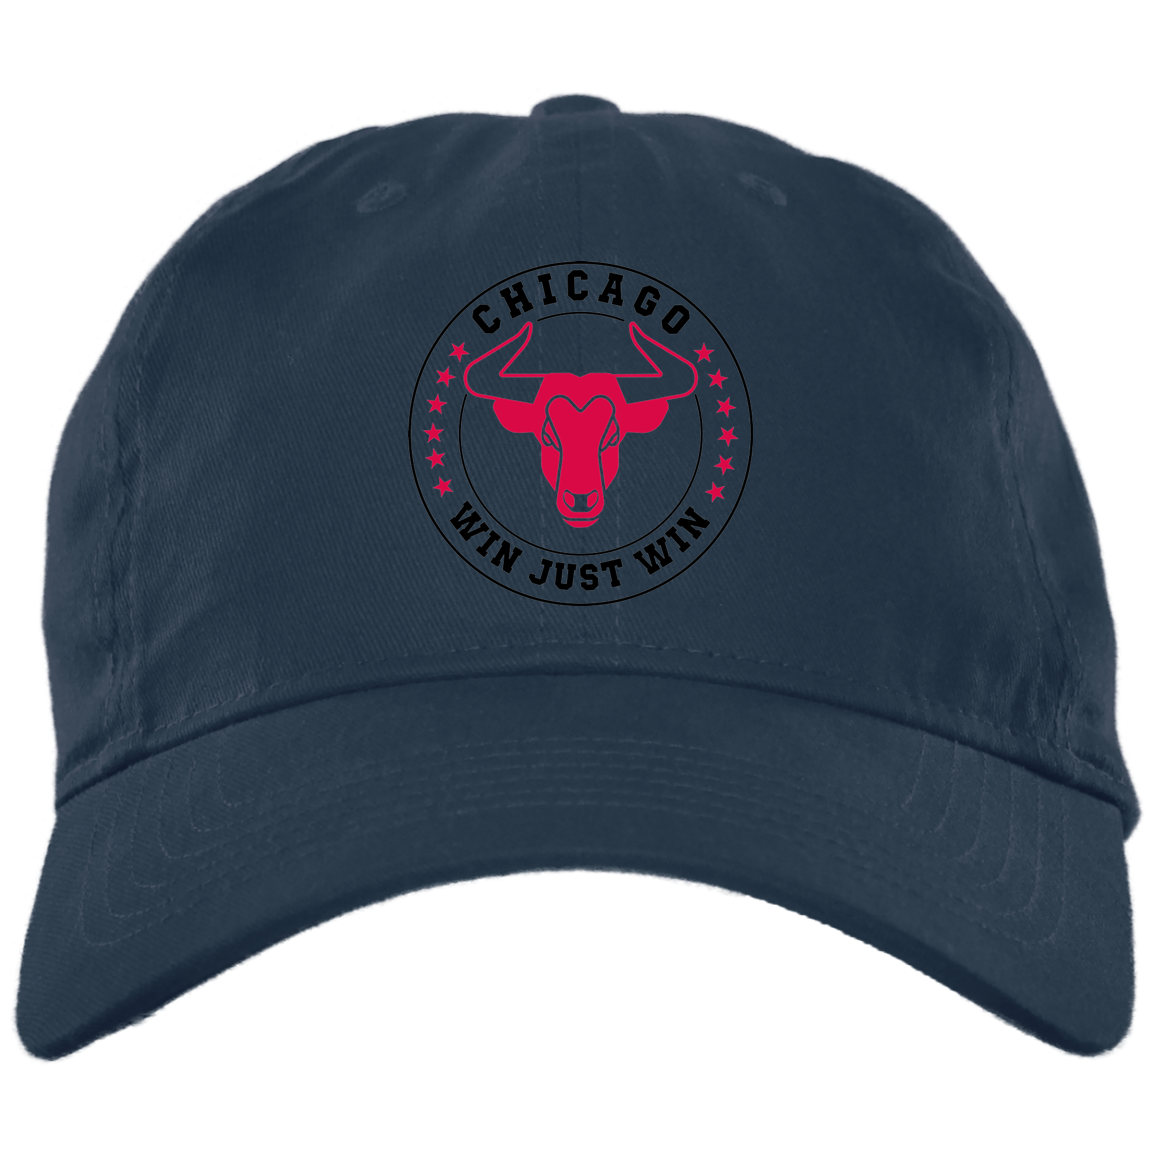 Chicago WJW- w/red stars Twill Unstructured Dad Cap